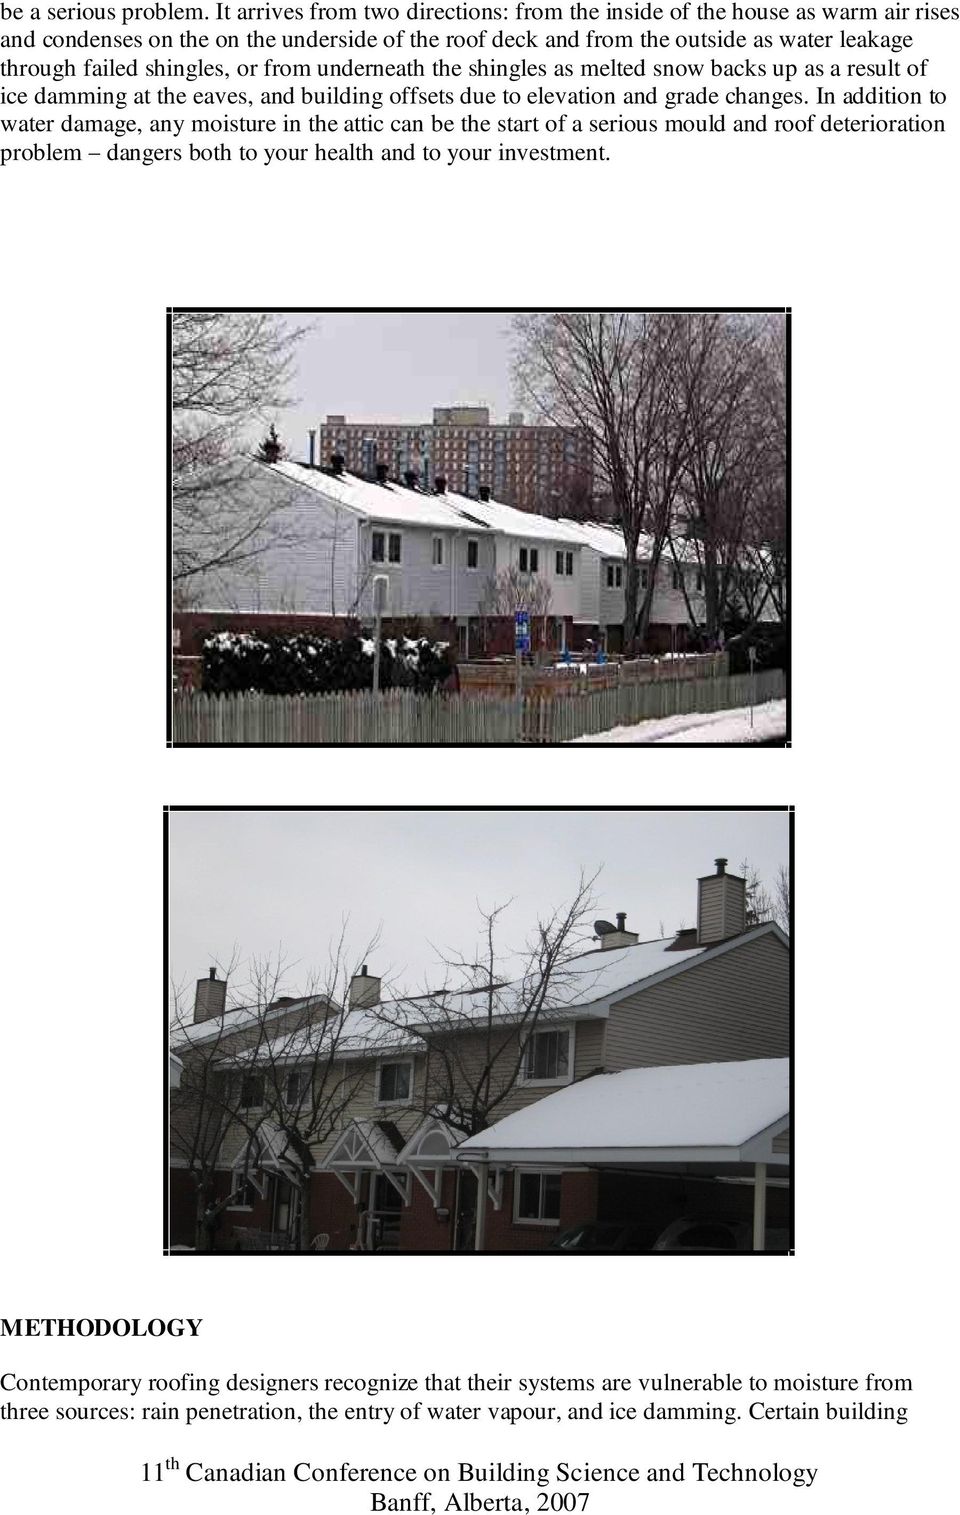 failed shingles, or from underneath the shingles as melted snow backs up as a result of ice damming at the eaves, and building offsets due to elevation and grade changes.